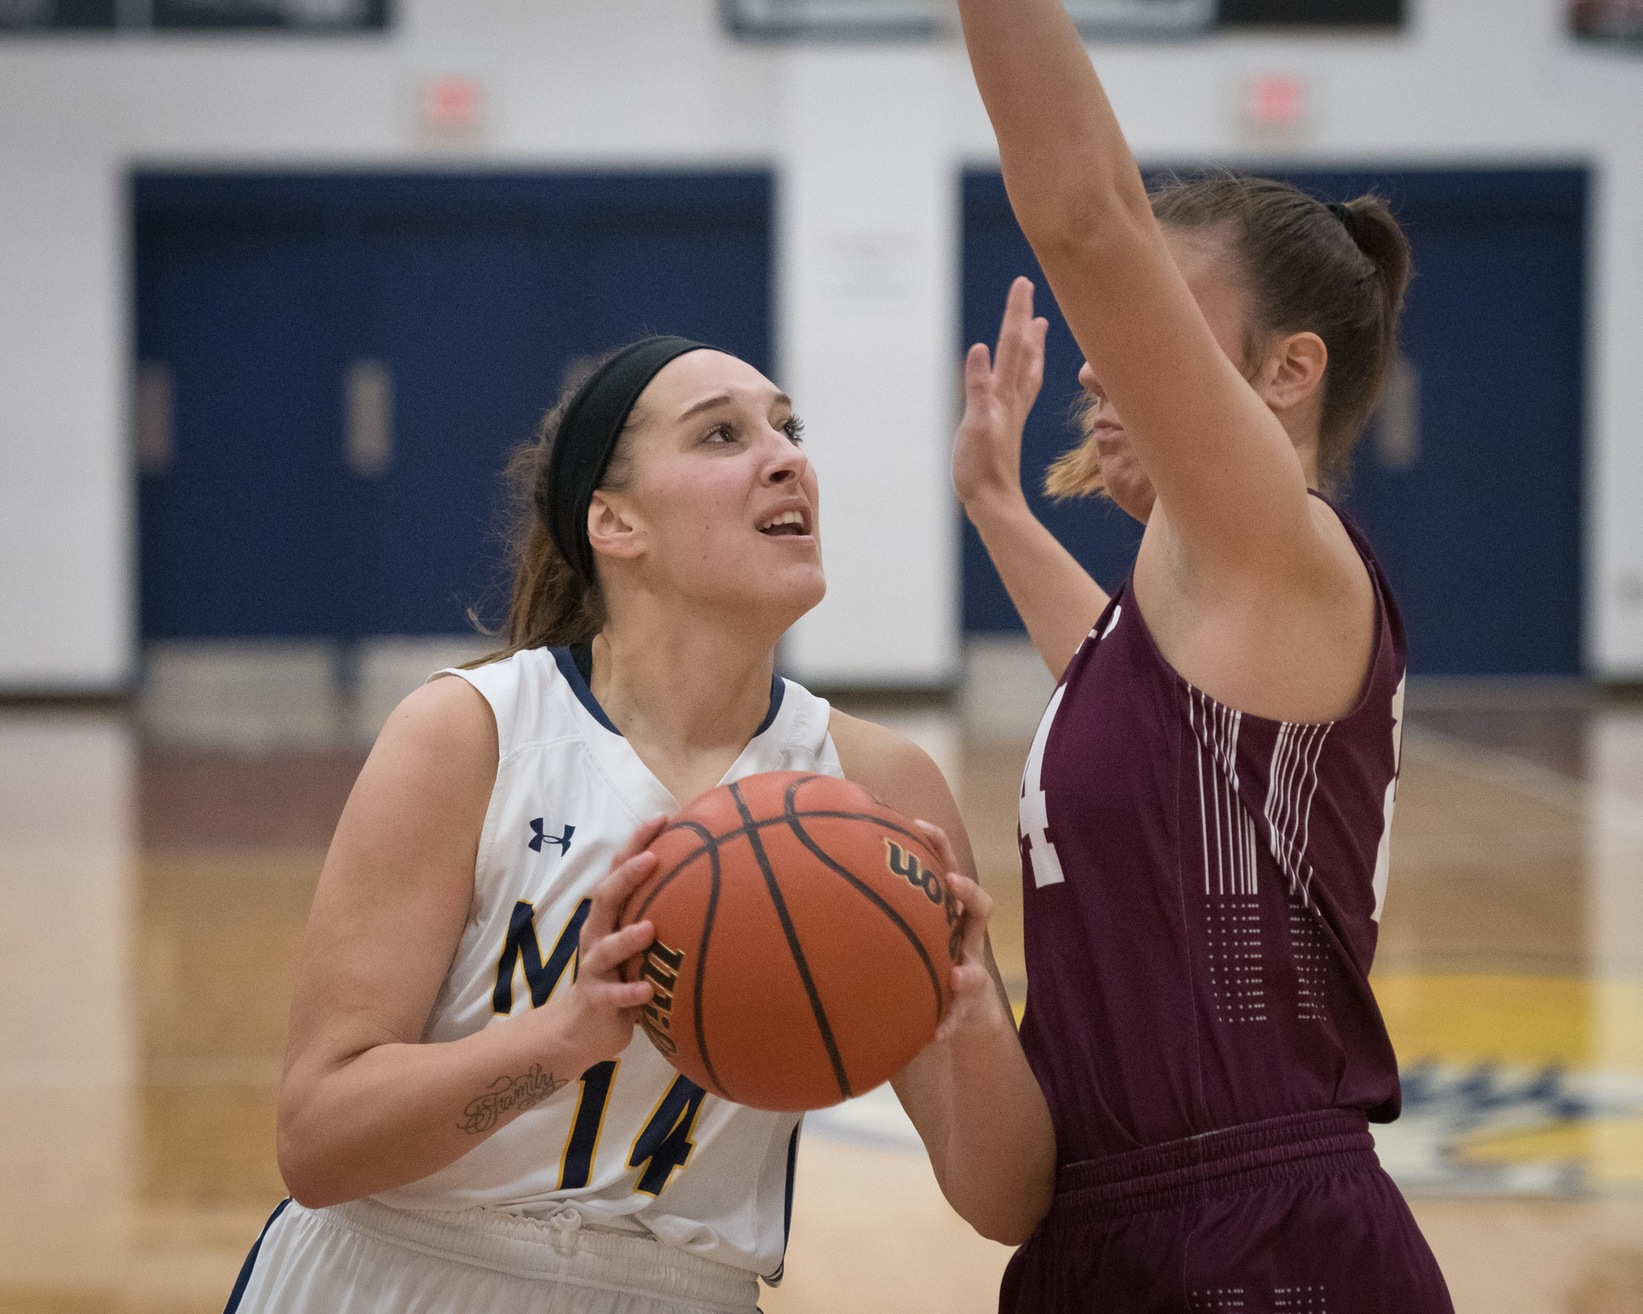 Women's Basketball handed 73-45 defeat by Bridgewater in MASCAC action